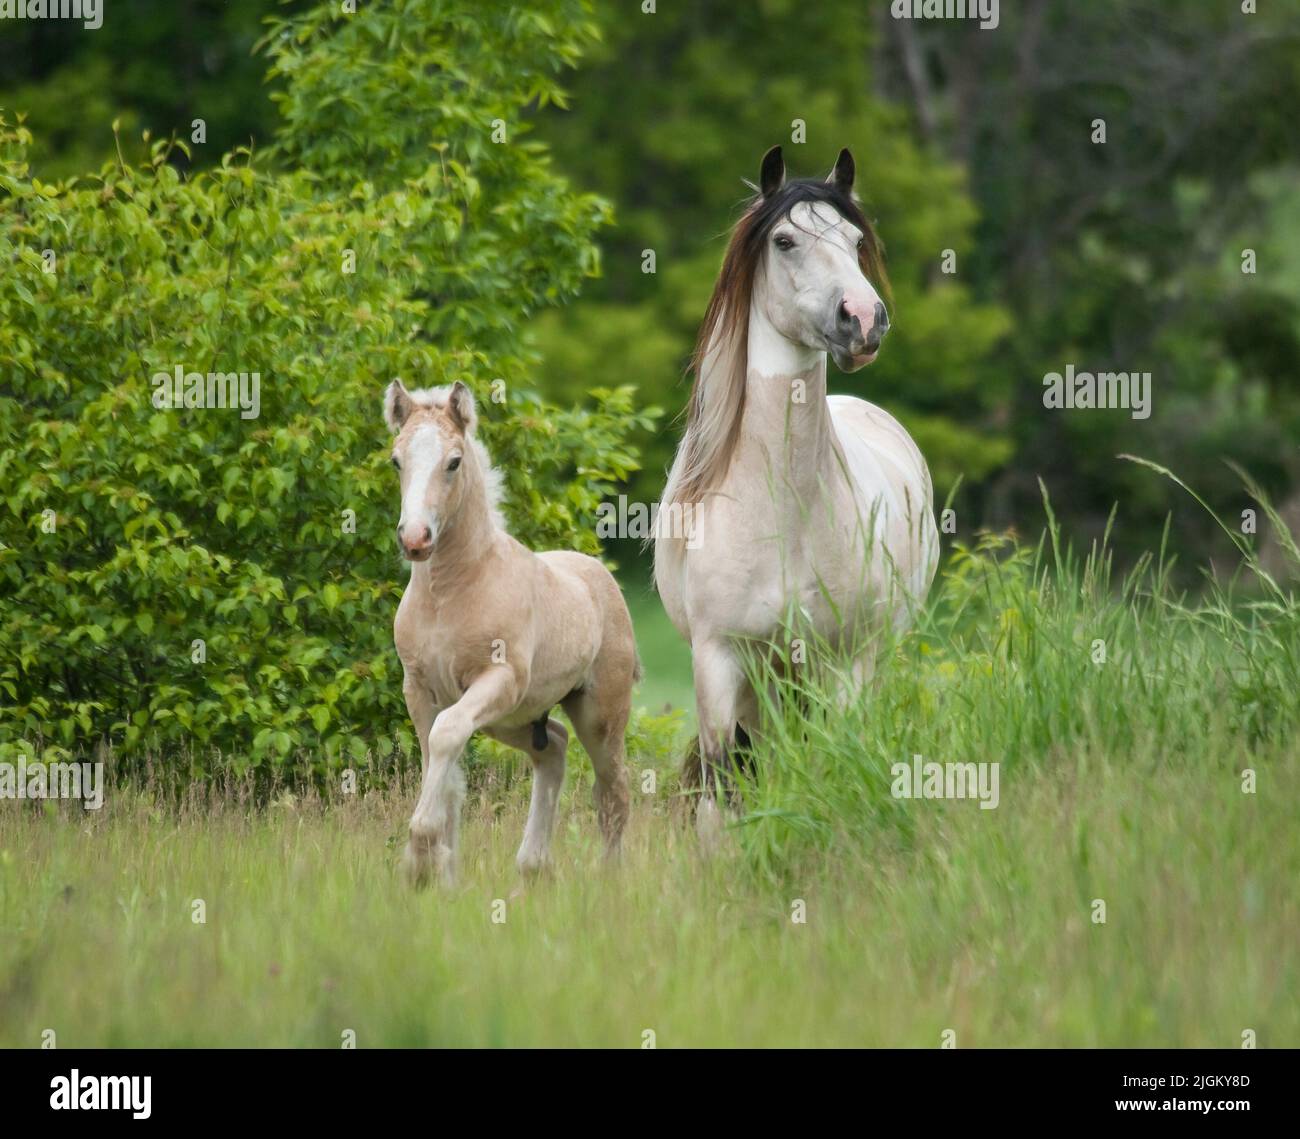 Gypsy horse mare with foal Stock Photo